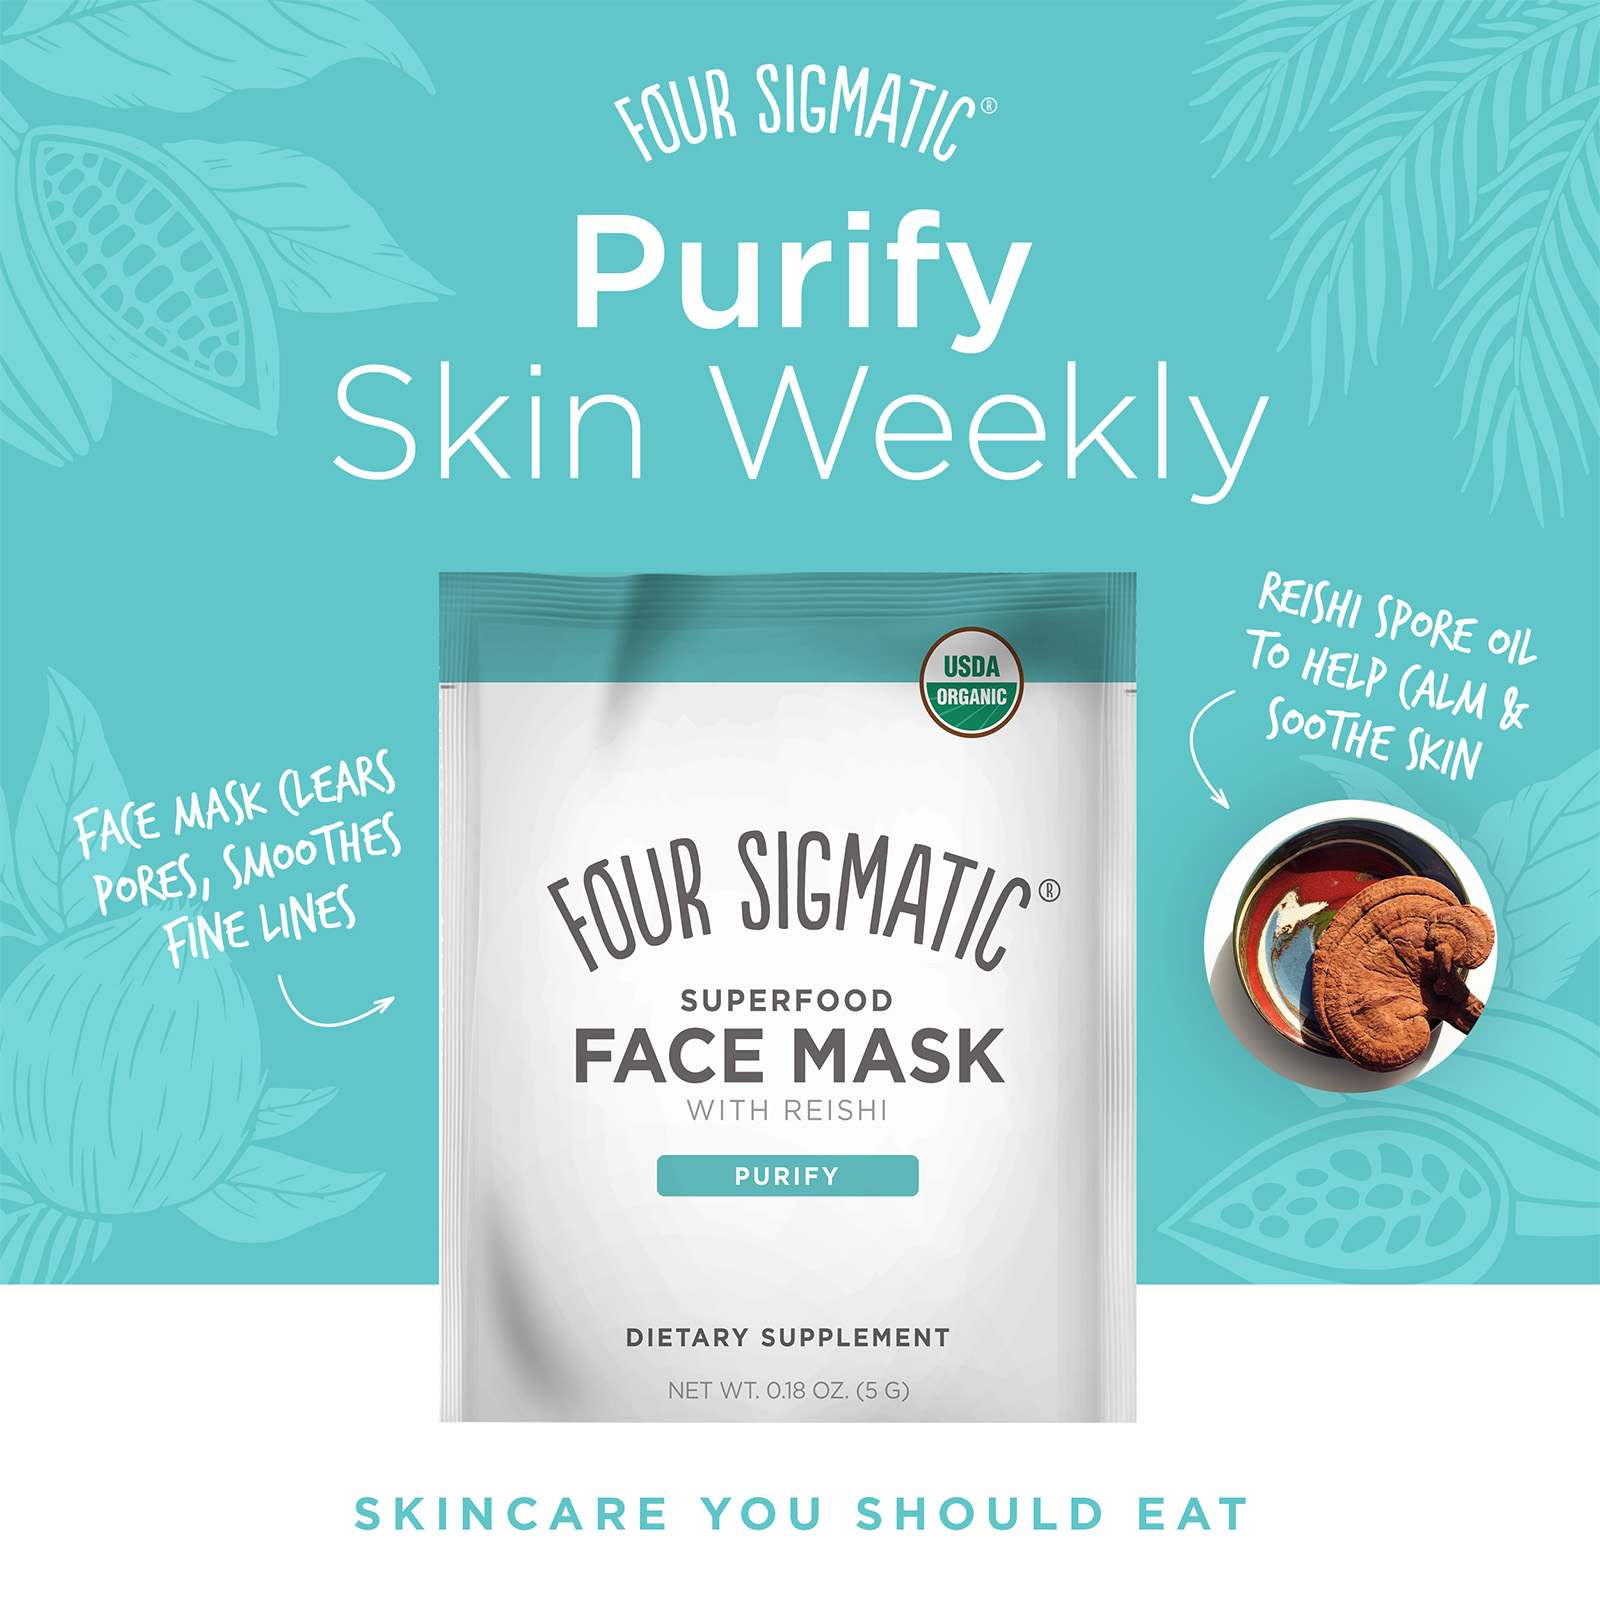 Purify Skin weekly, face mask clears pores, smoothes fine lines, reishi spore oil to help calm and soothe skin